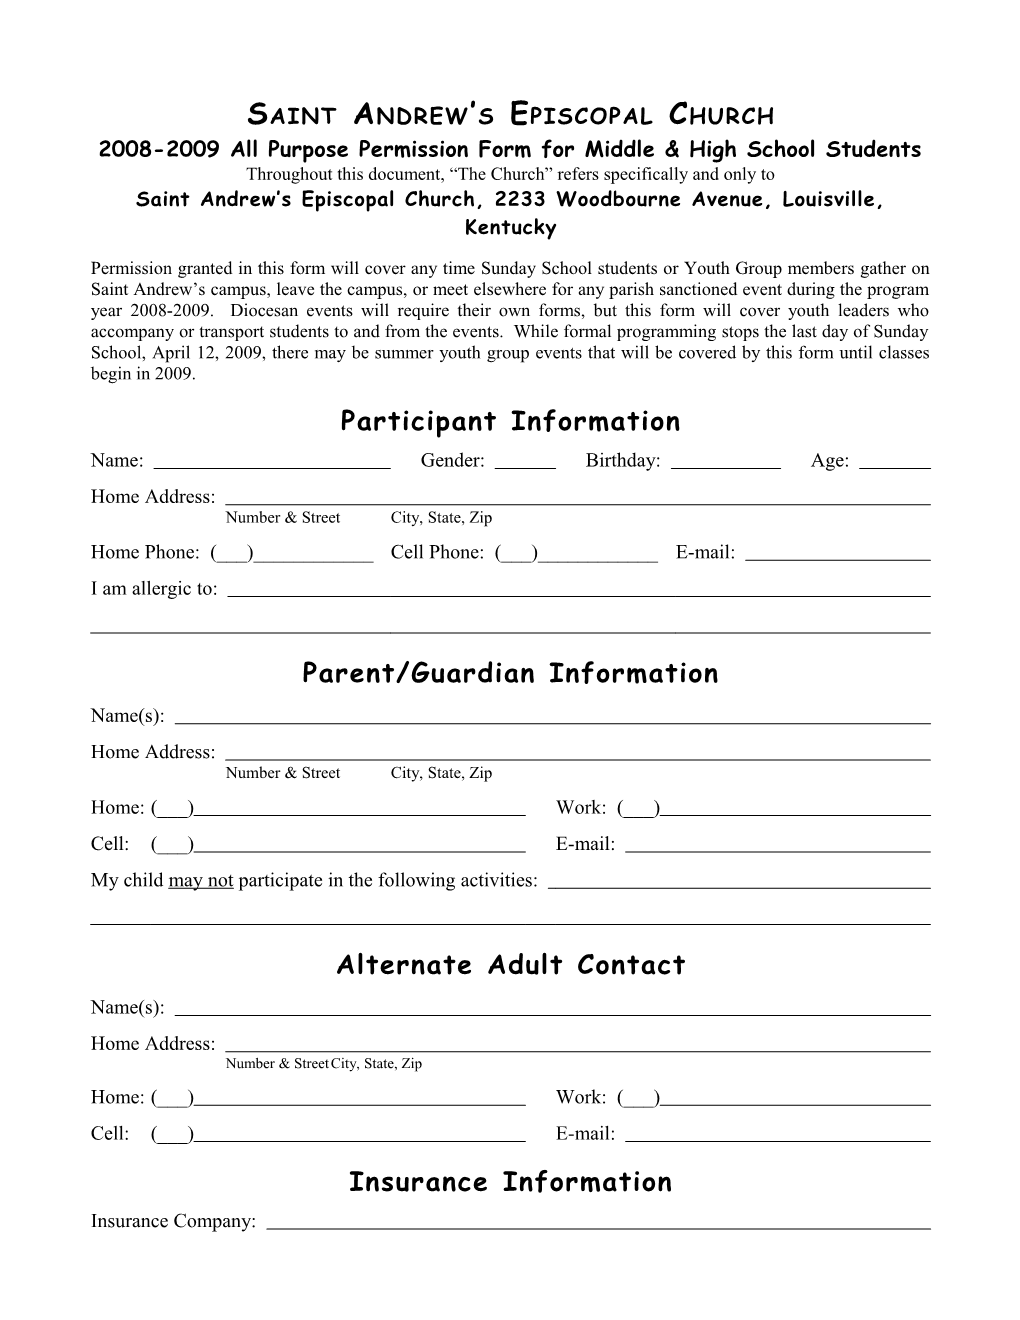 Permission Form for Middle and High School Students